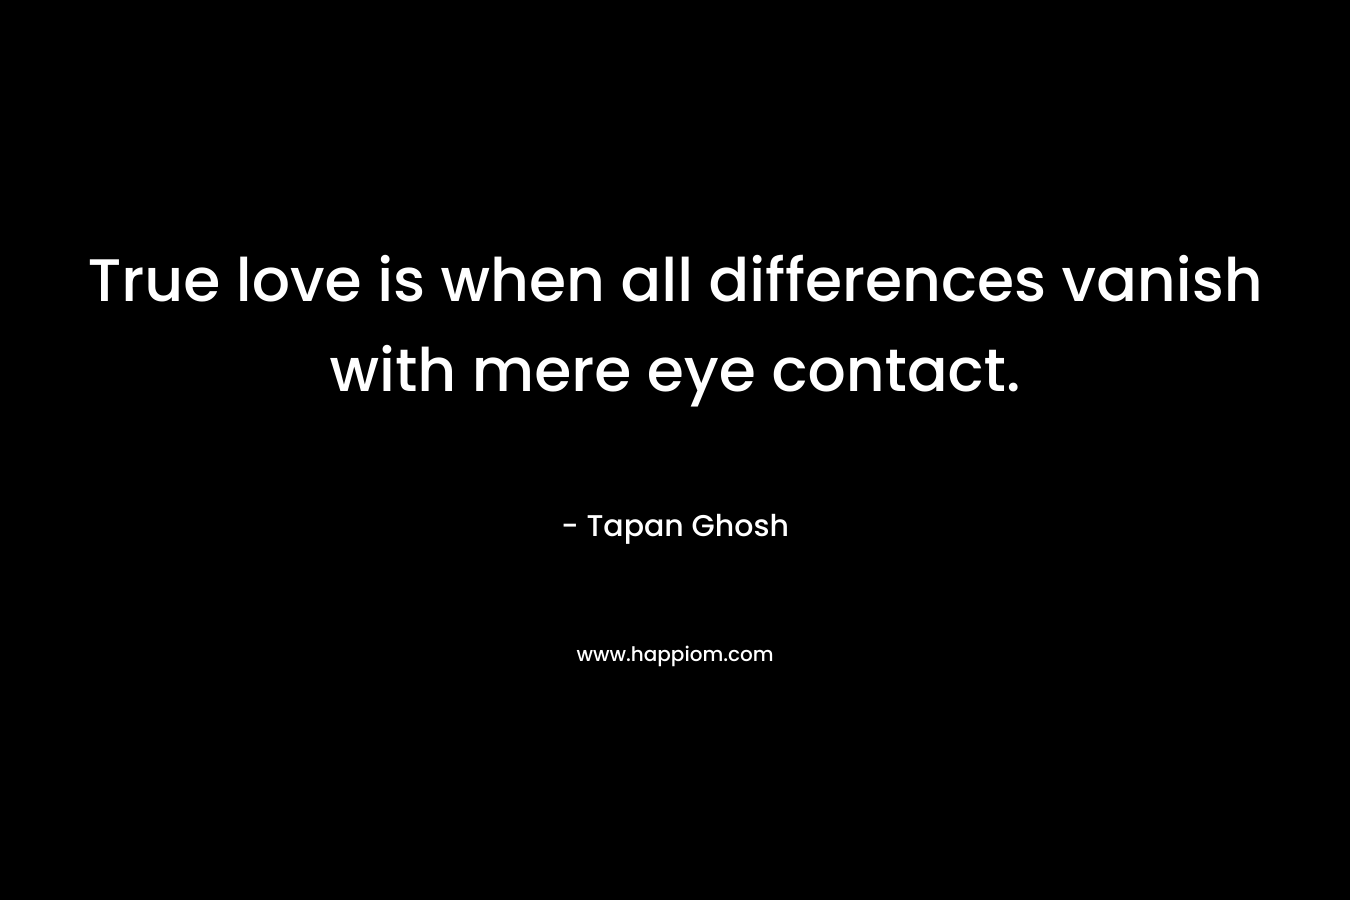 True love is when all differences vanish with mere eye contact.